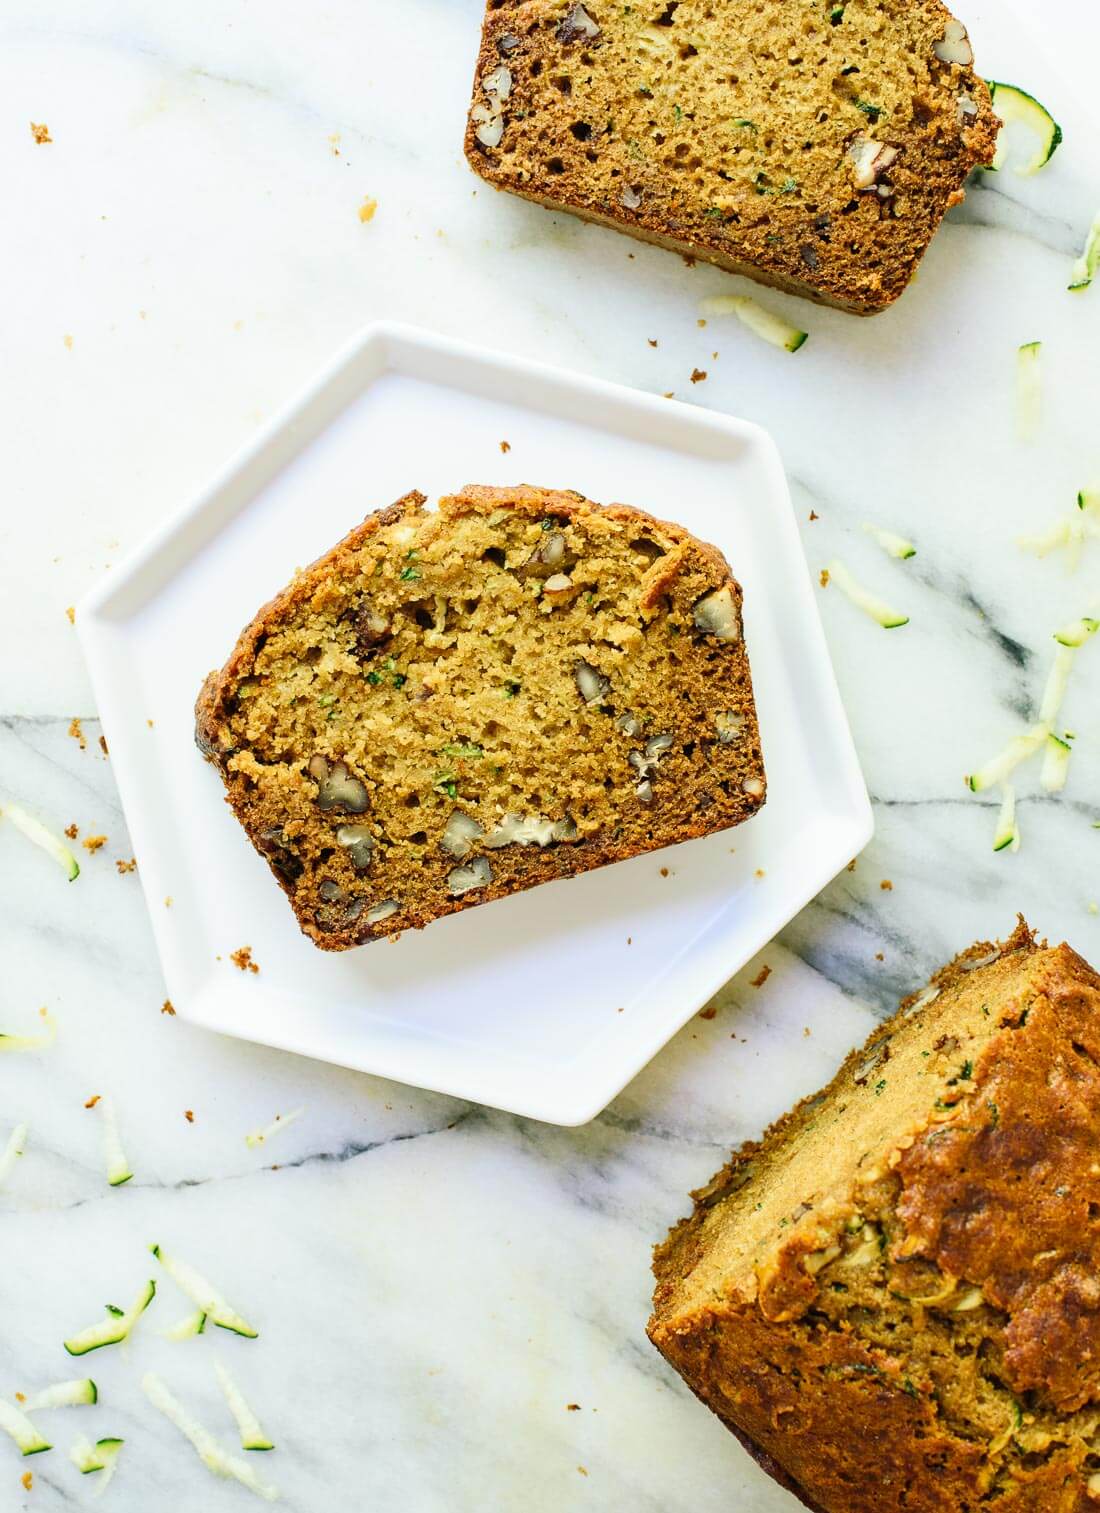 Fluffy and healthy zucchini bread! No refined flours or sugars here. cookieandkate.com